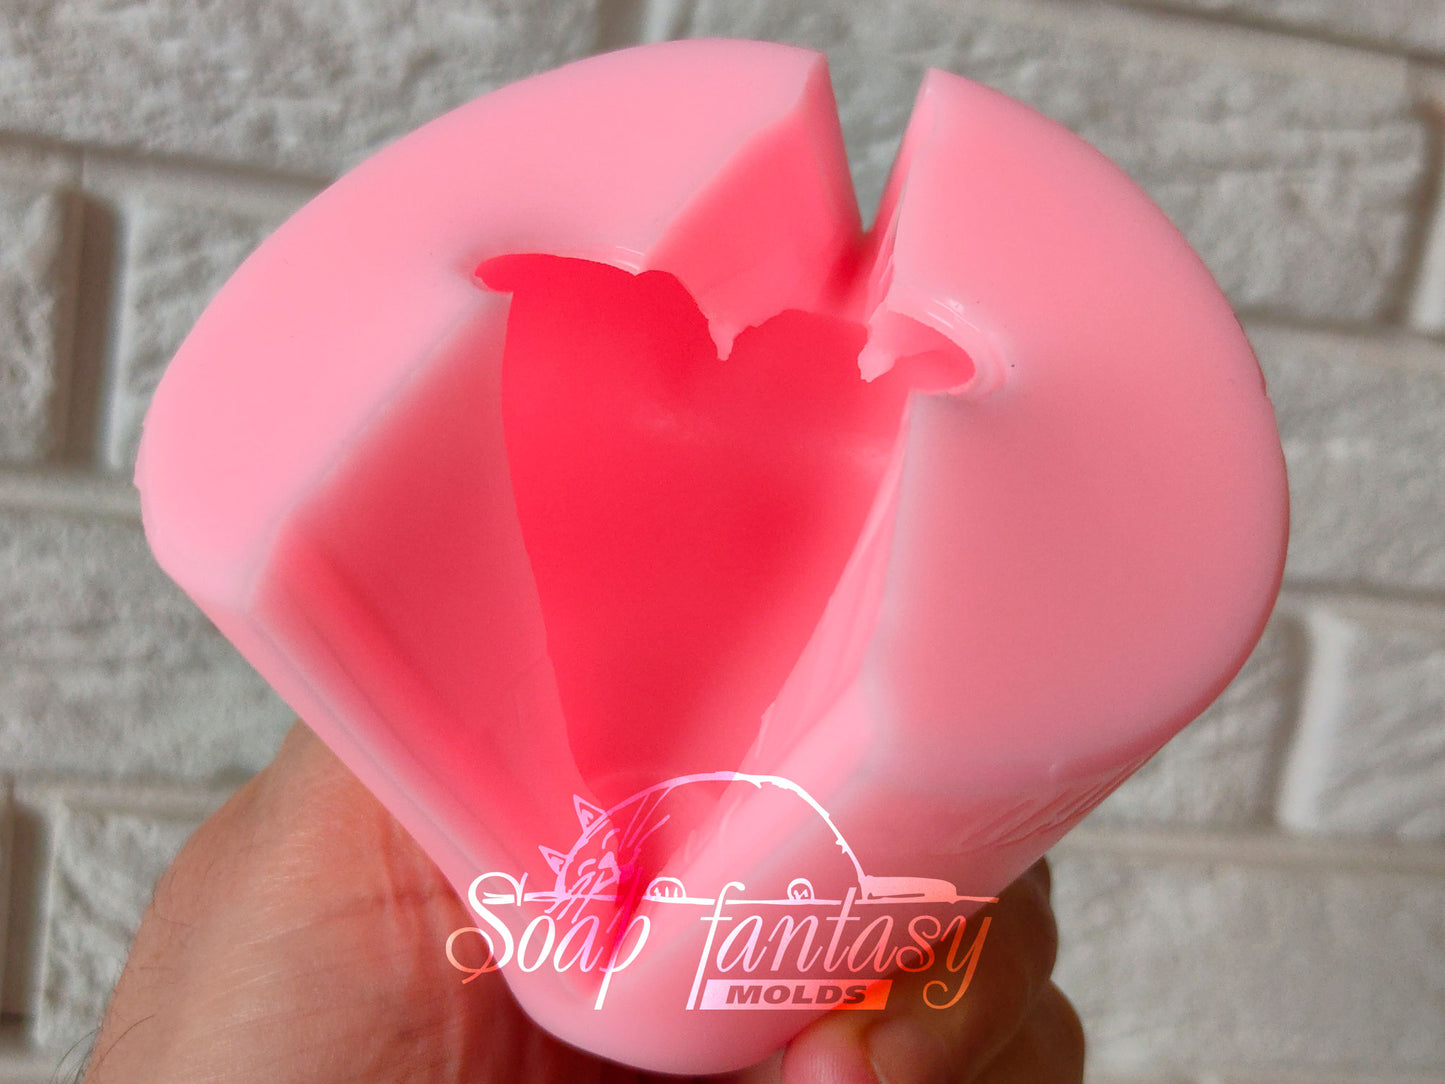 Pear silicone mold for soap making